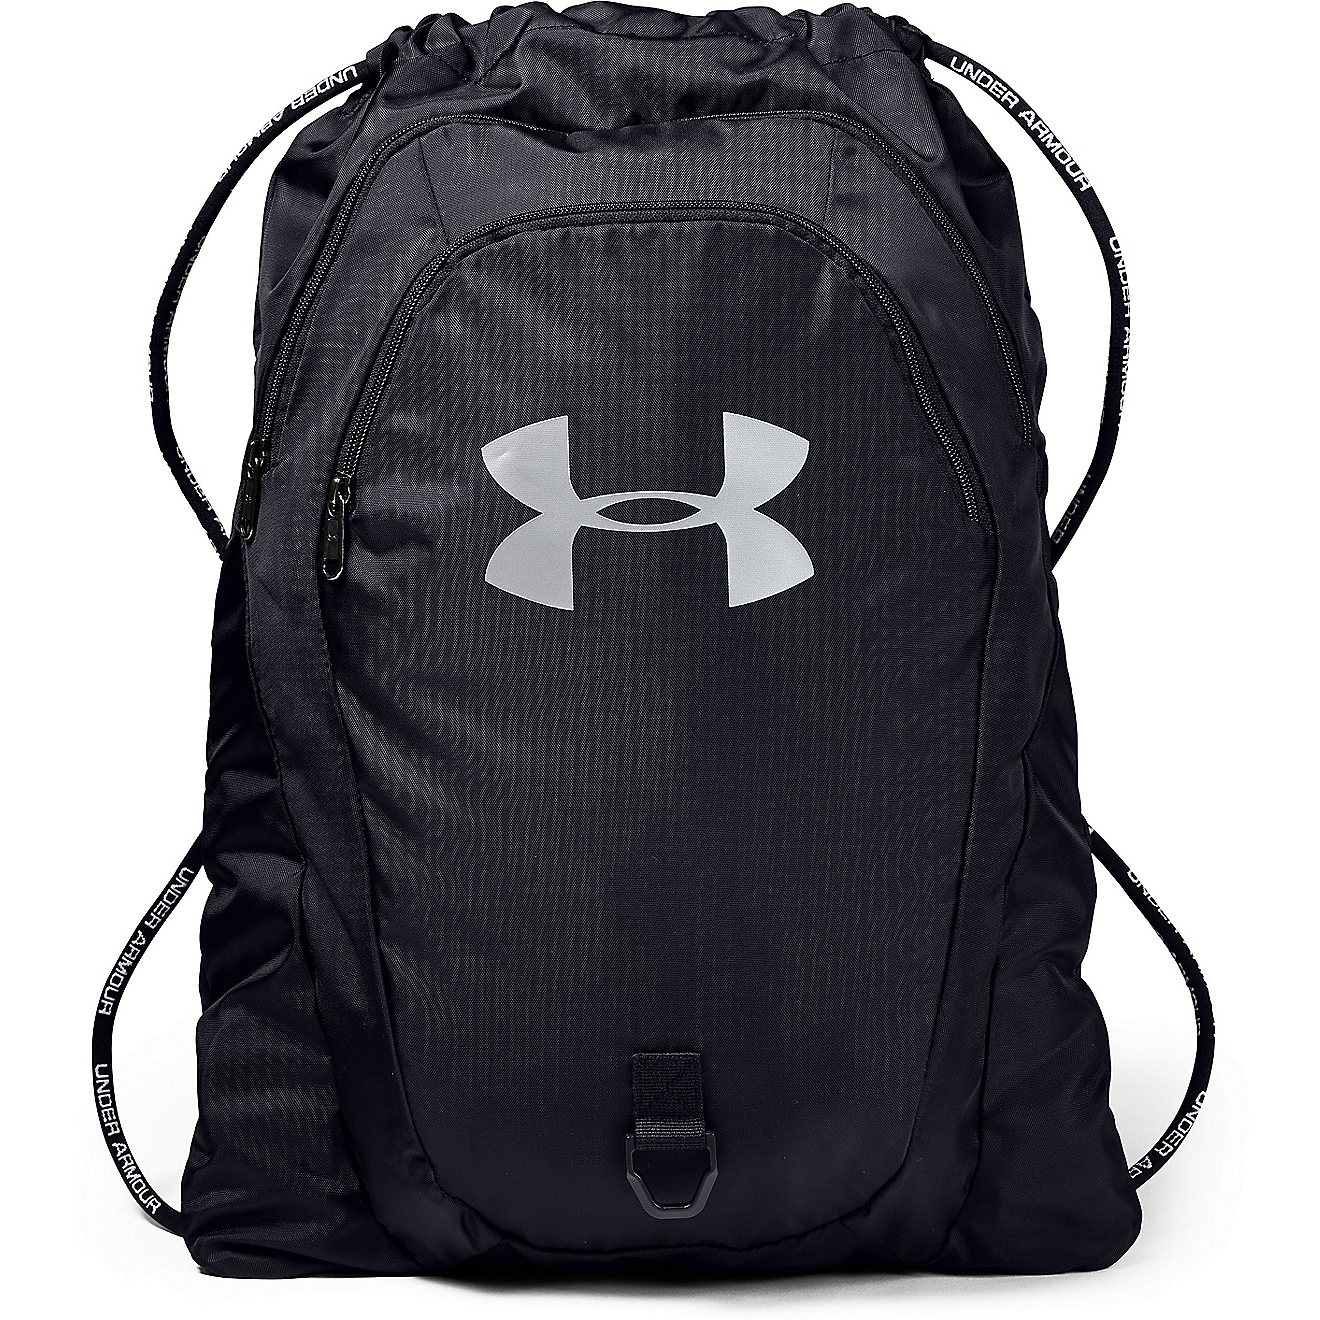 Under Armour Undeniable 2.0 Drawstring Bag                                                                                       - view number 1